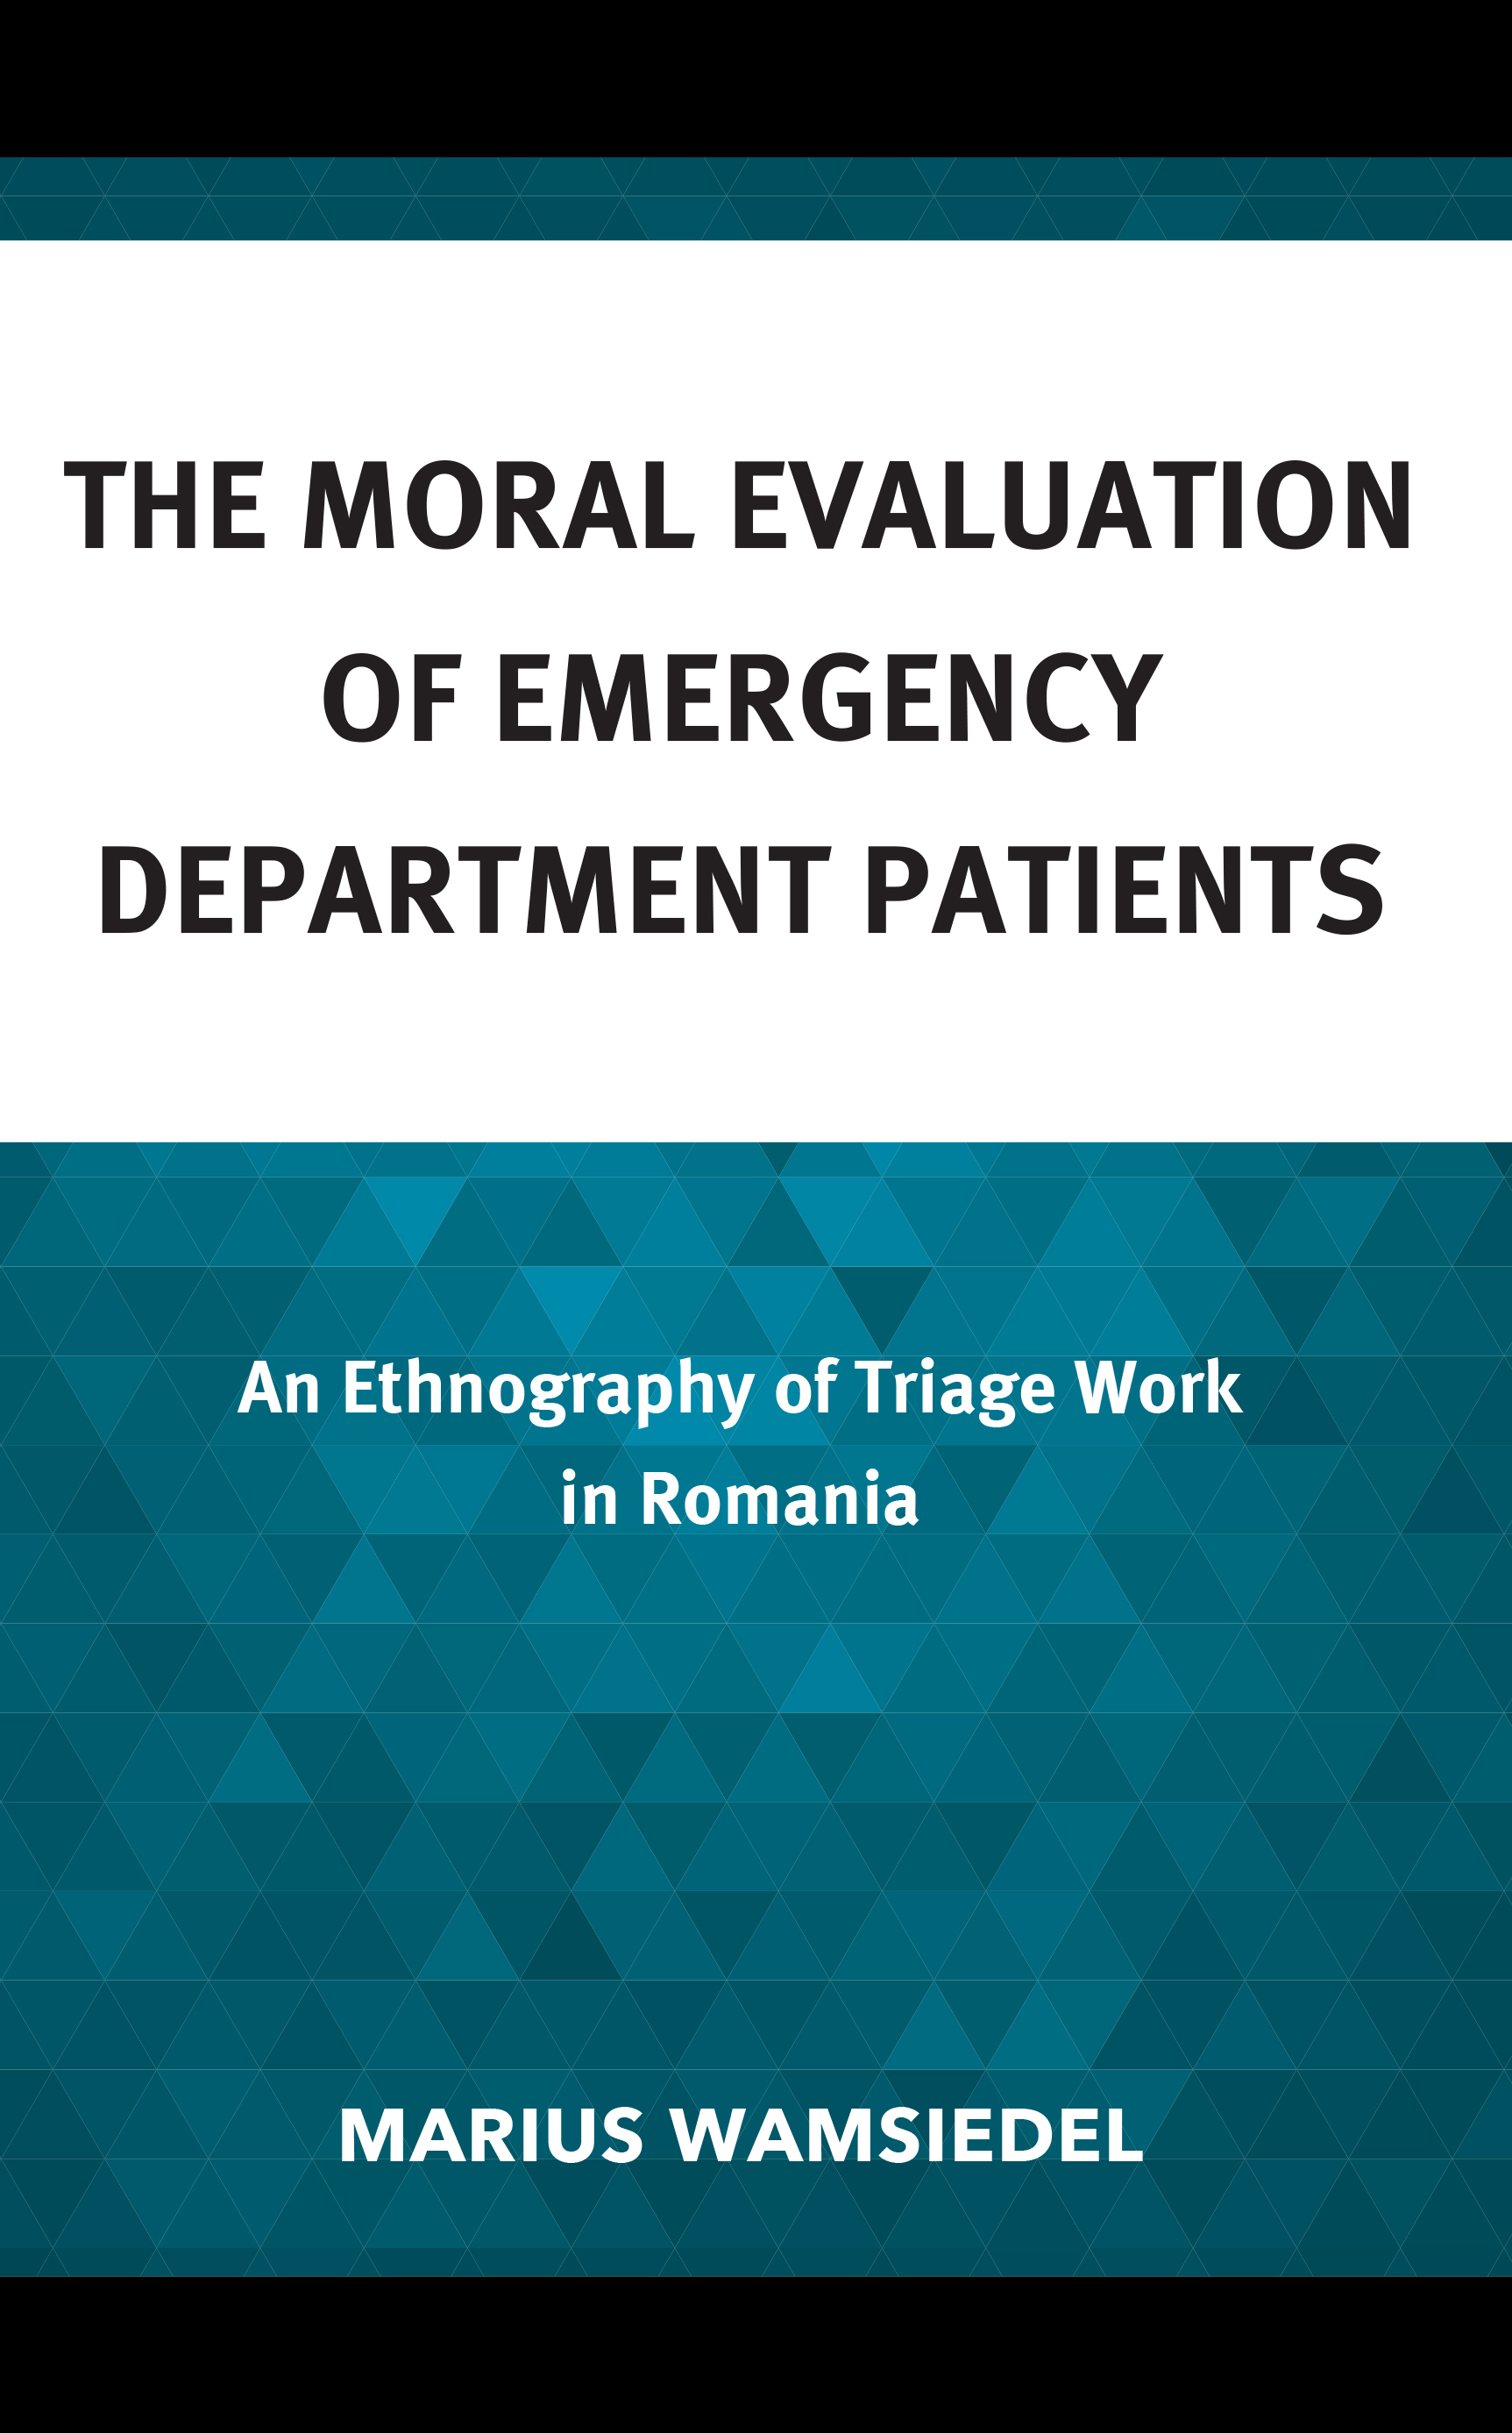 The Moral Evaluation of Emergency Department Patients: An Ethnography of Triage Work in Romania